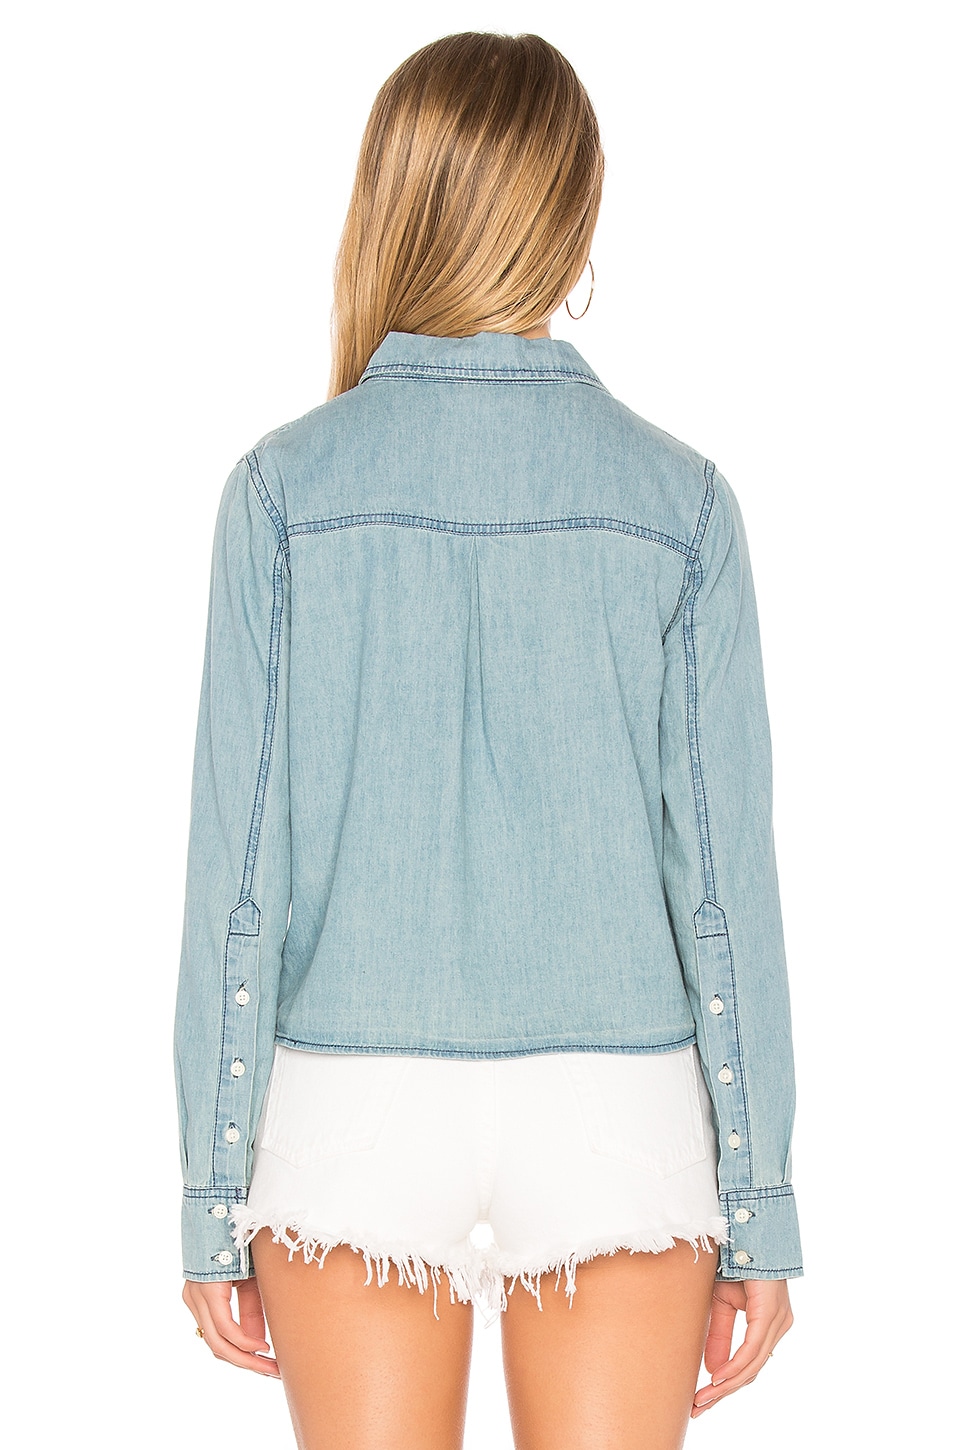 CUPCAKES AND CASHMERE Ayres Tie Front Shirt in Chambray | ModeSens